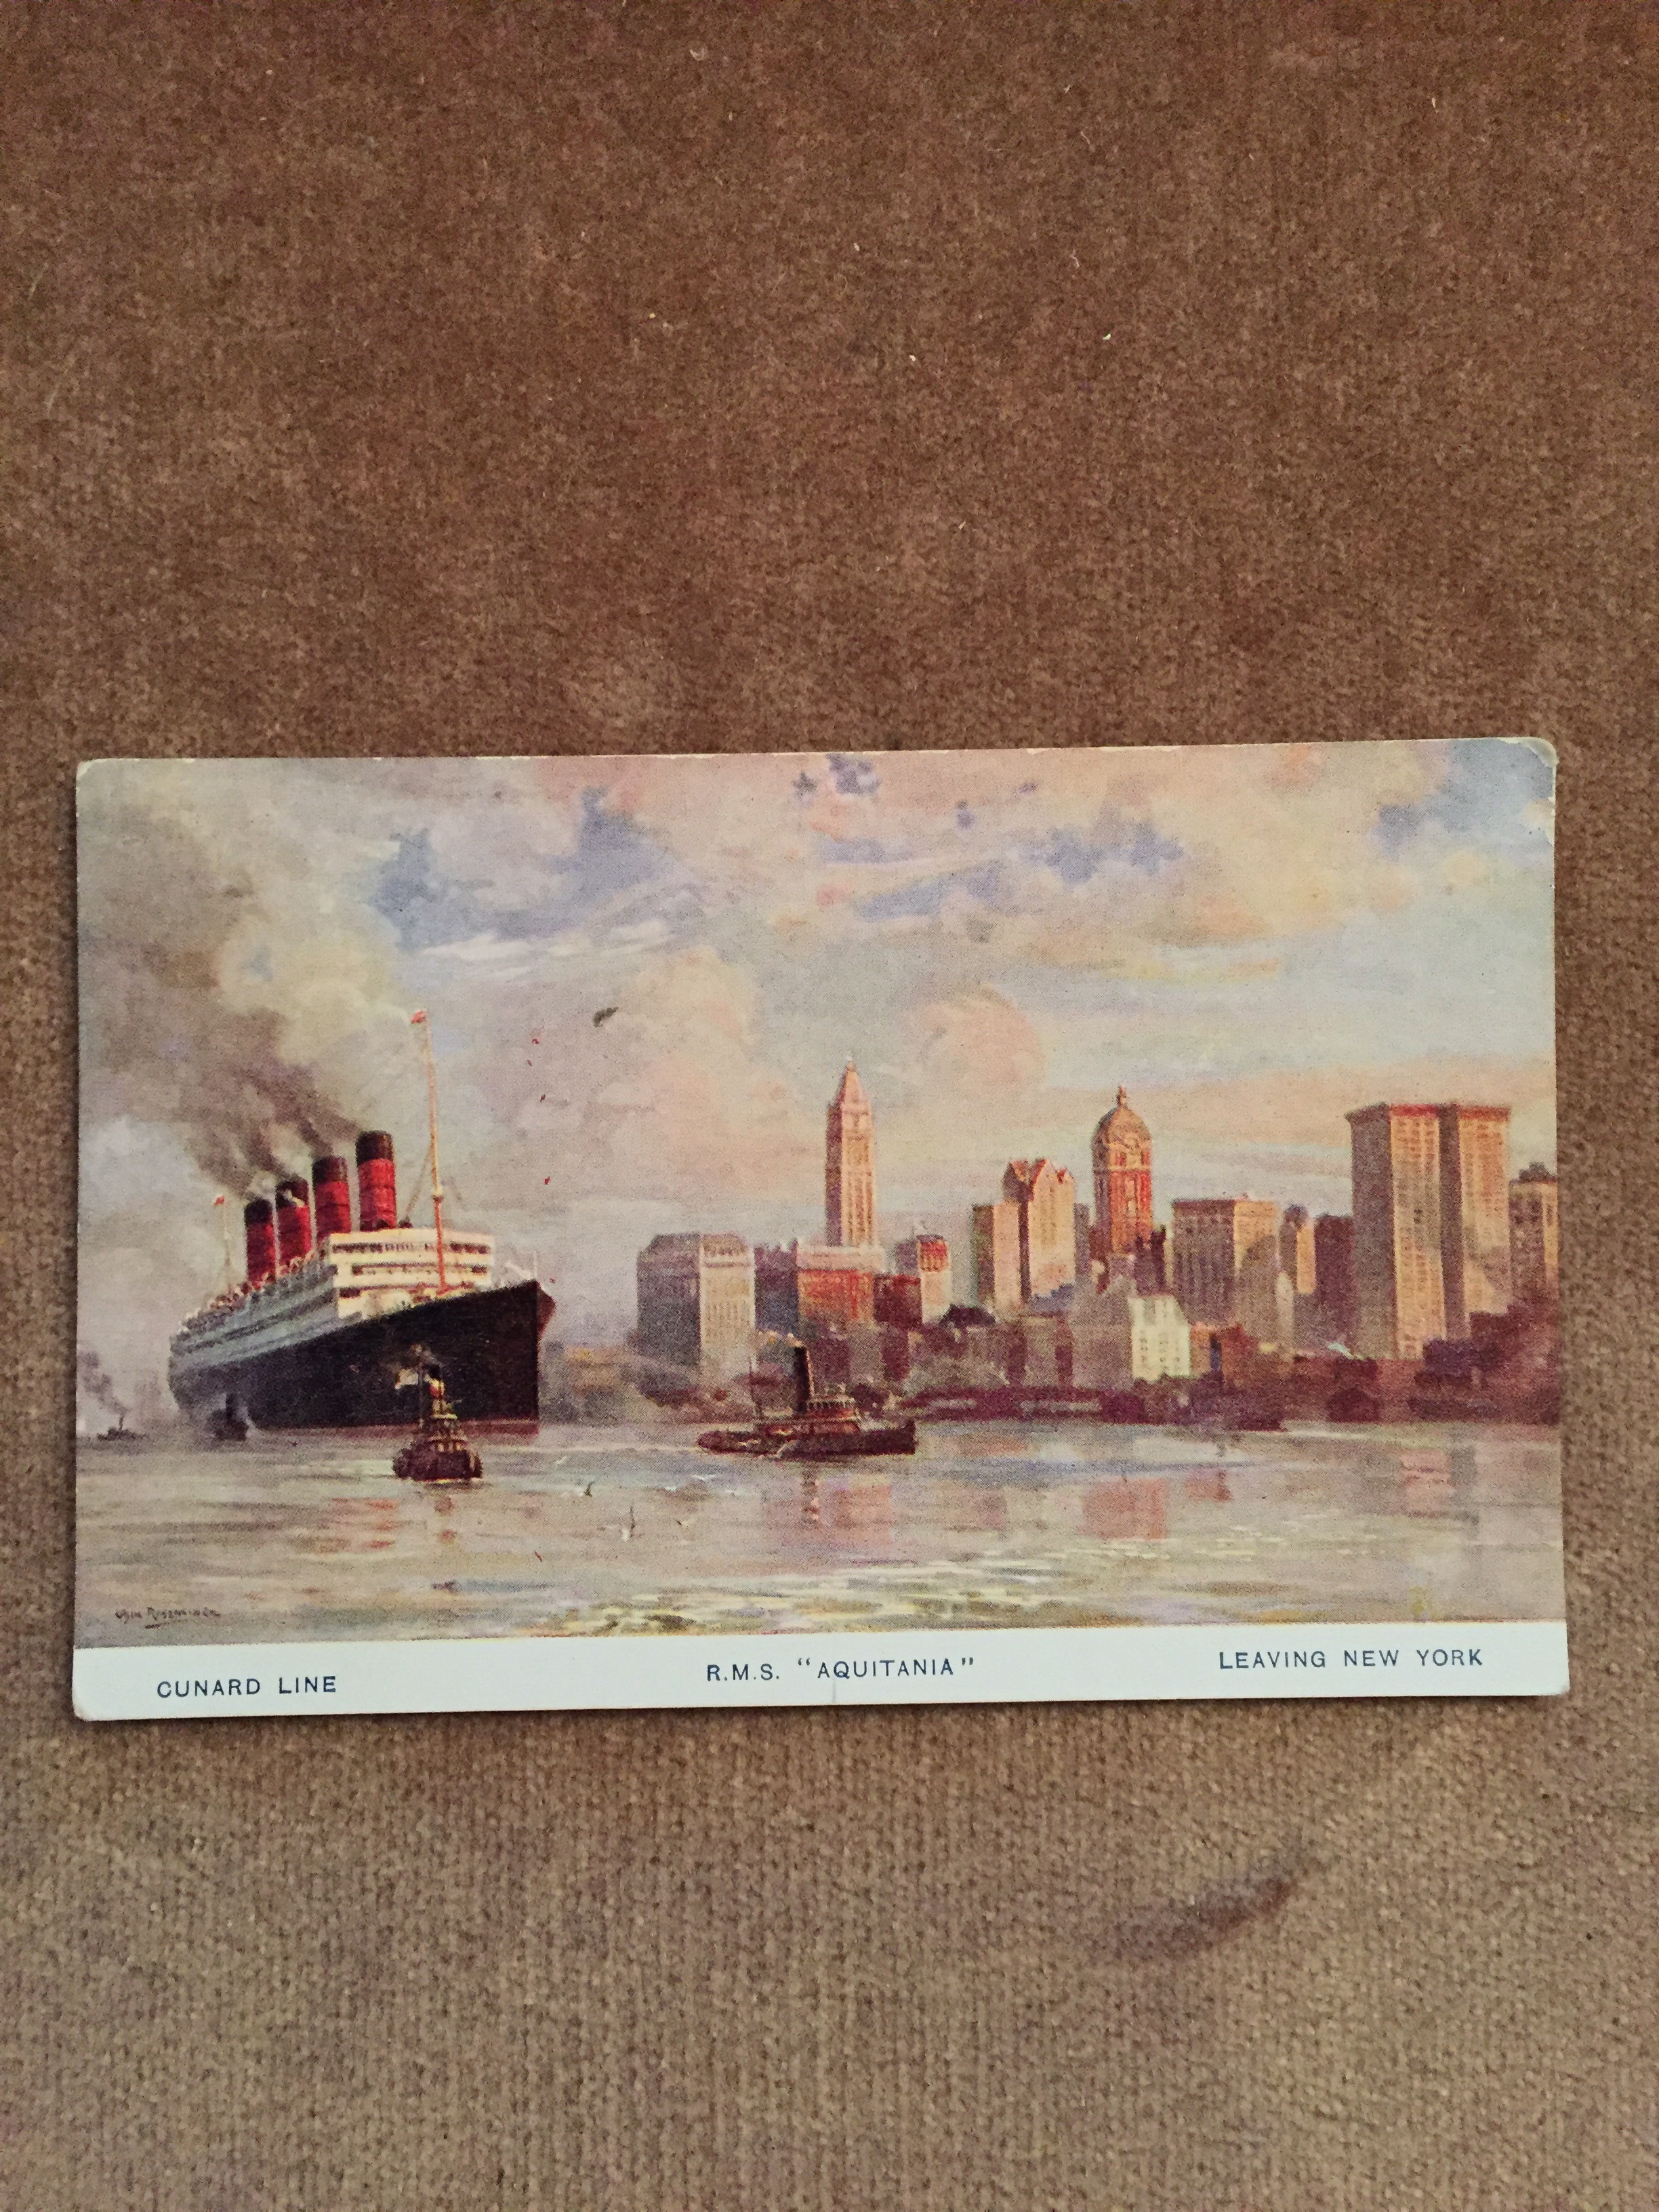 UNUSED COLOUR POSTCARD FROM THE OLD VESSEL THE RMS AQUITANIA